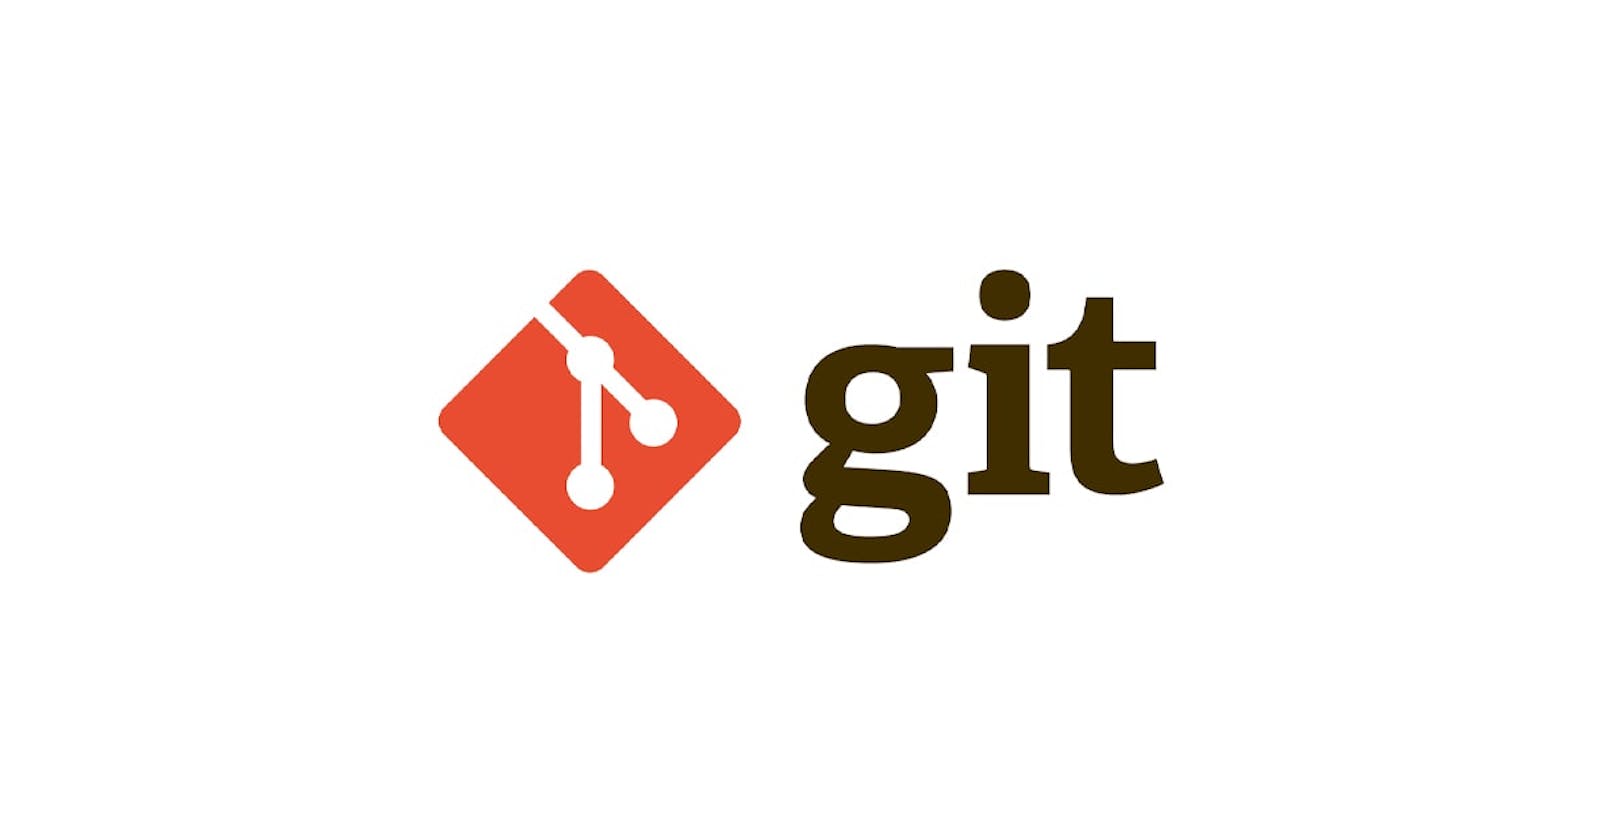 Fixing common mistakes with Git